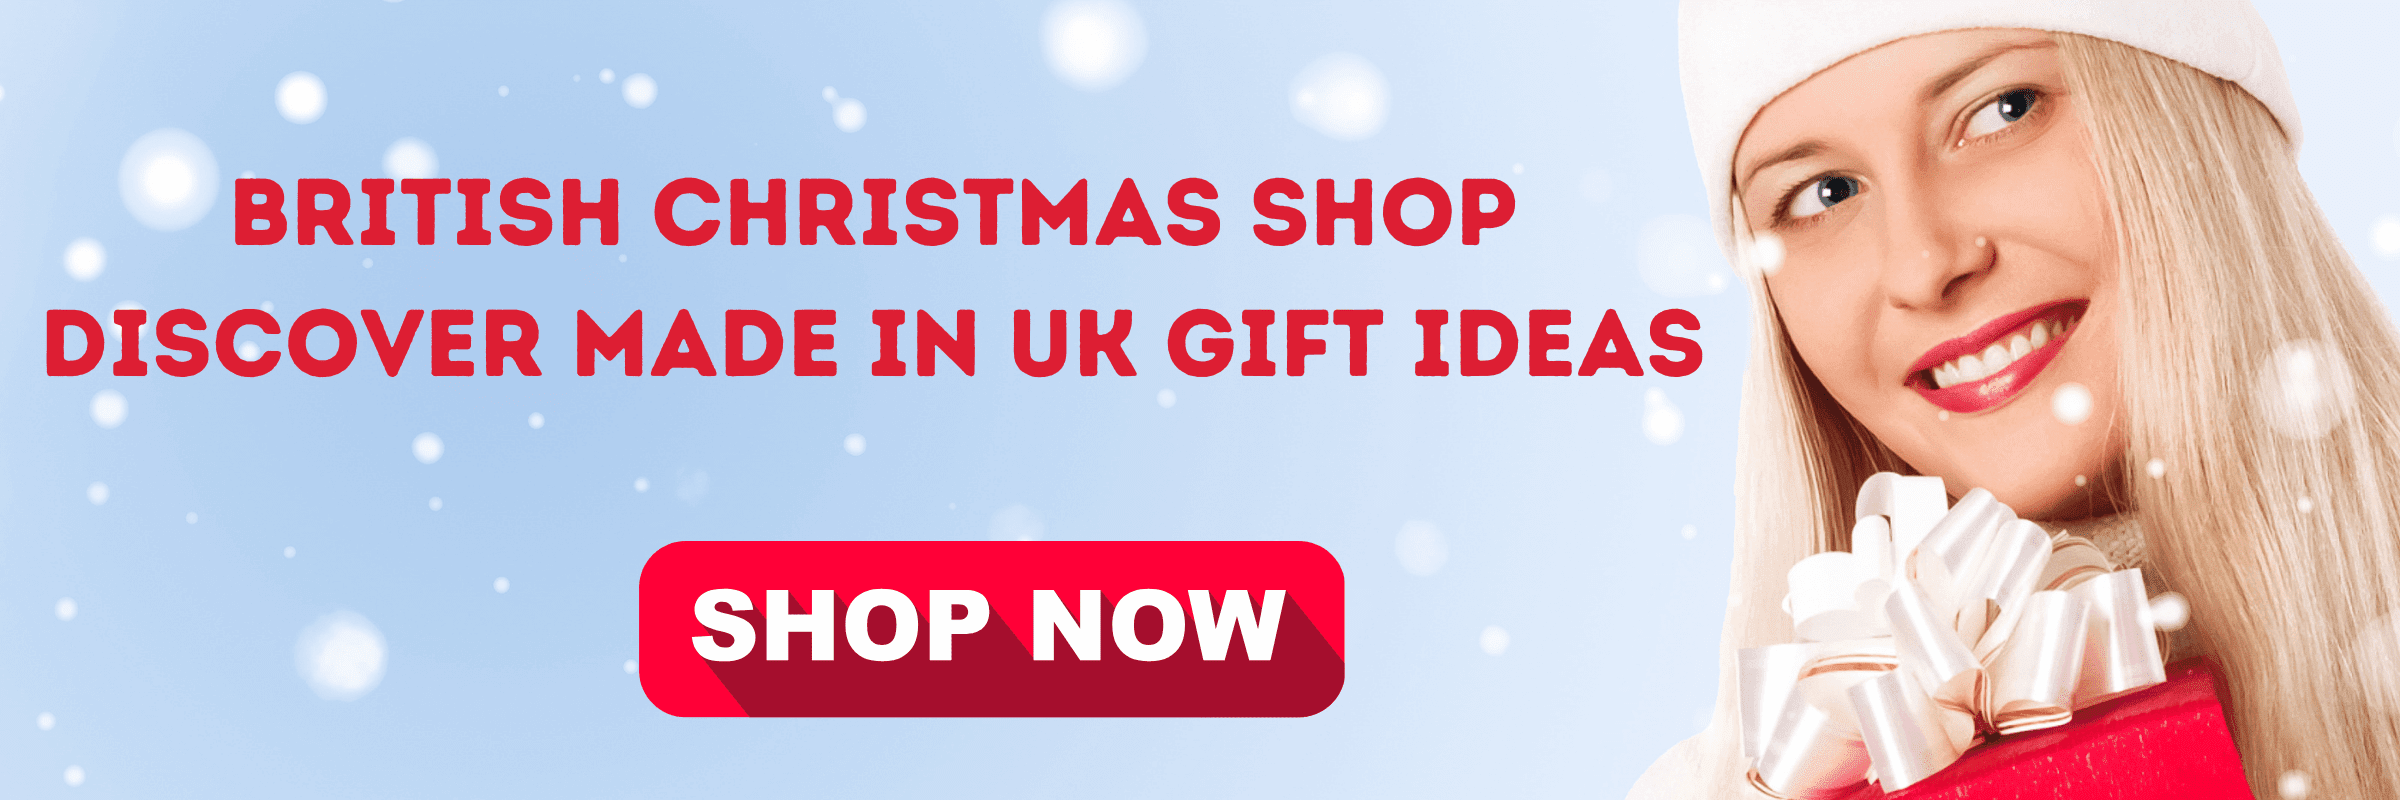 british christmas shop, shop for gifts for him, her and the whole family from a selection of products made in the uk